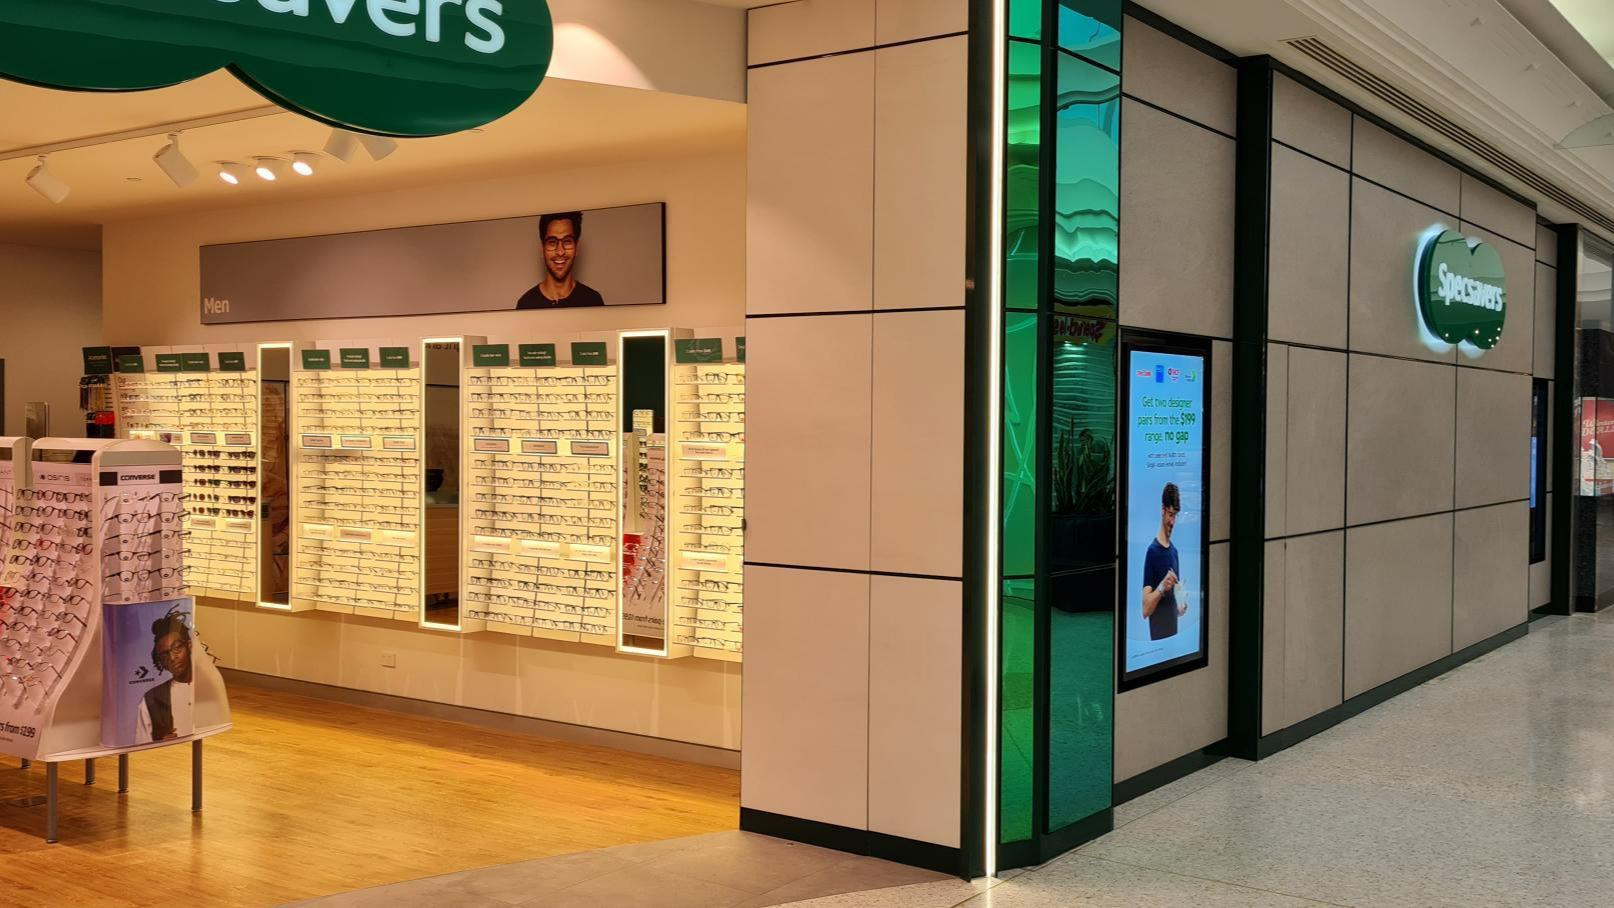 Images Specsavers Optometrists & Audiology - West Lakes Westfield